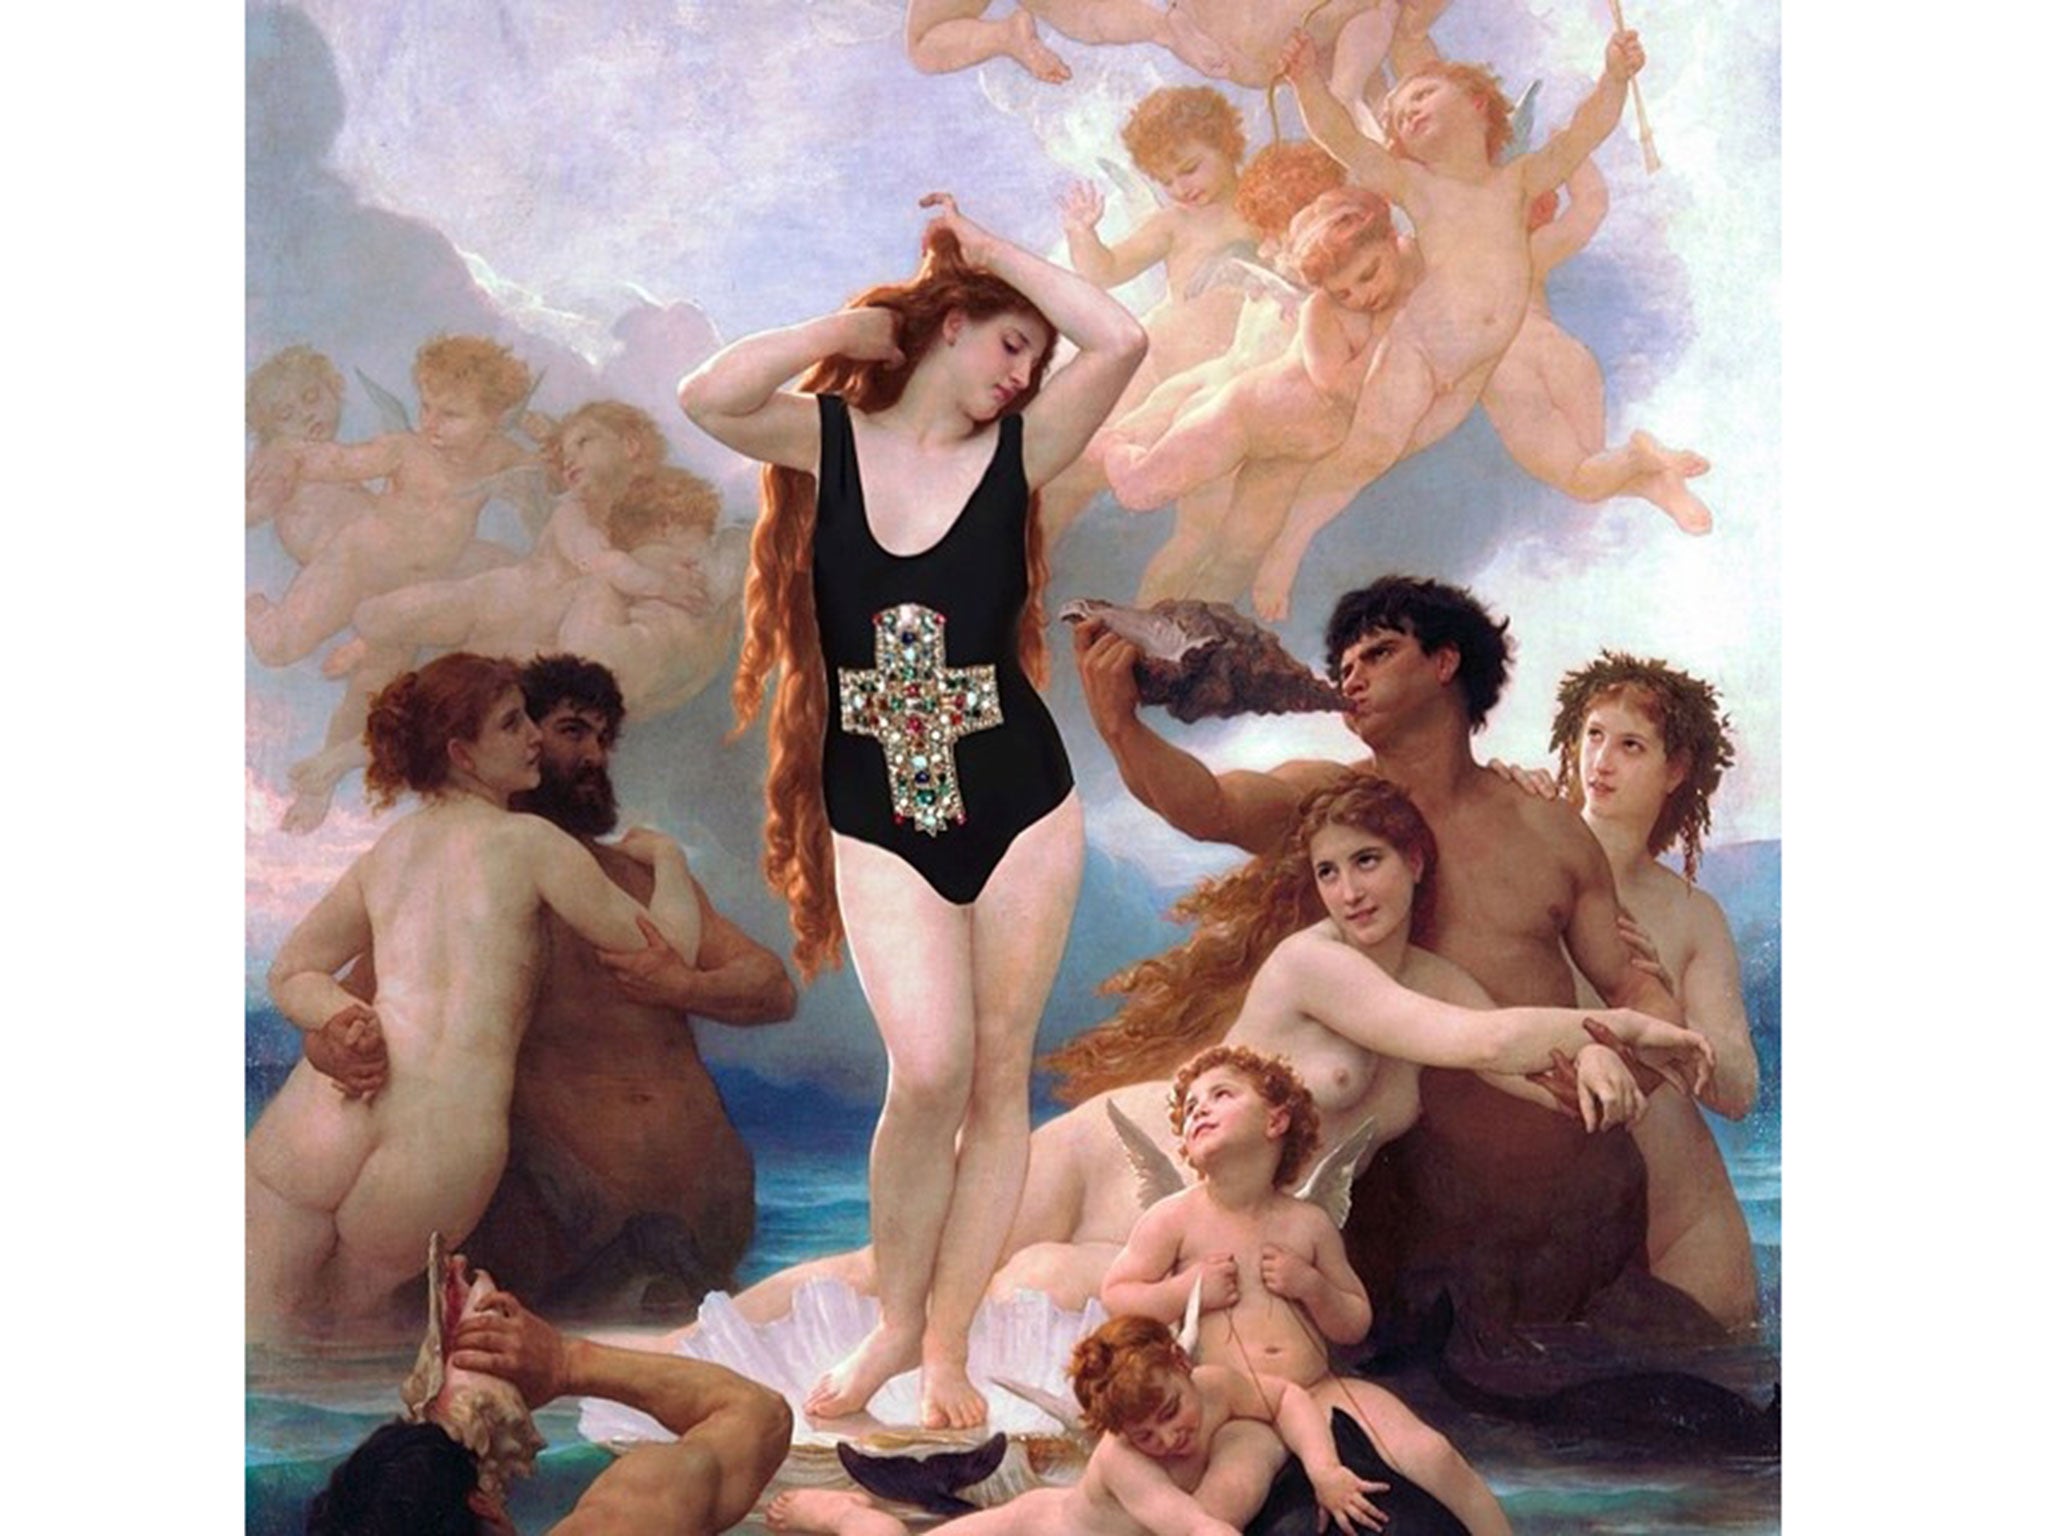 'Venus, Clothed.' Original: The Birth Of Venus by William Adolphe Bouguereau. Added: Nasty Gal swimsuit